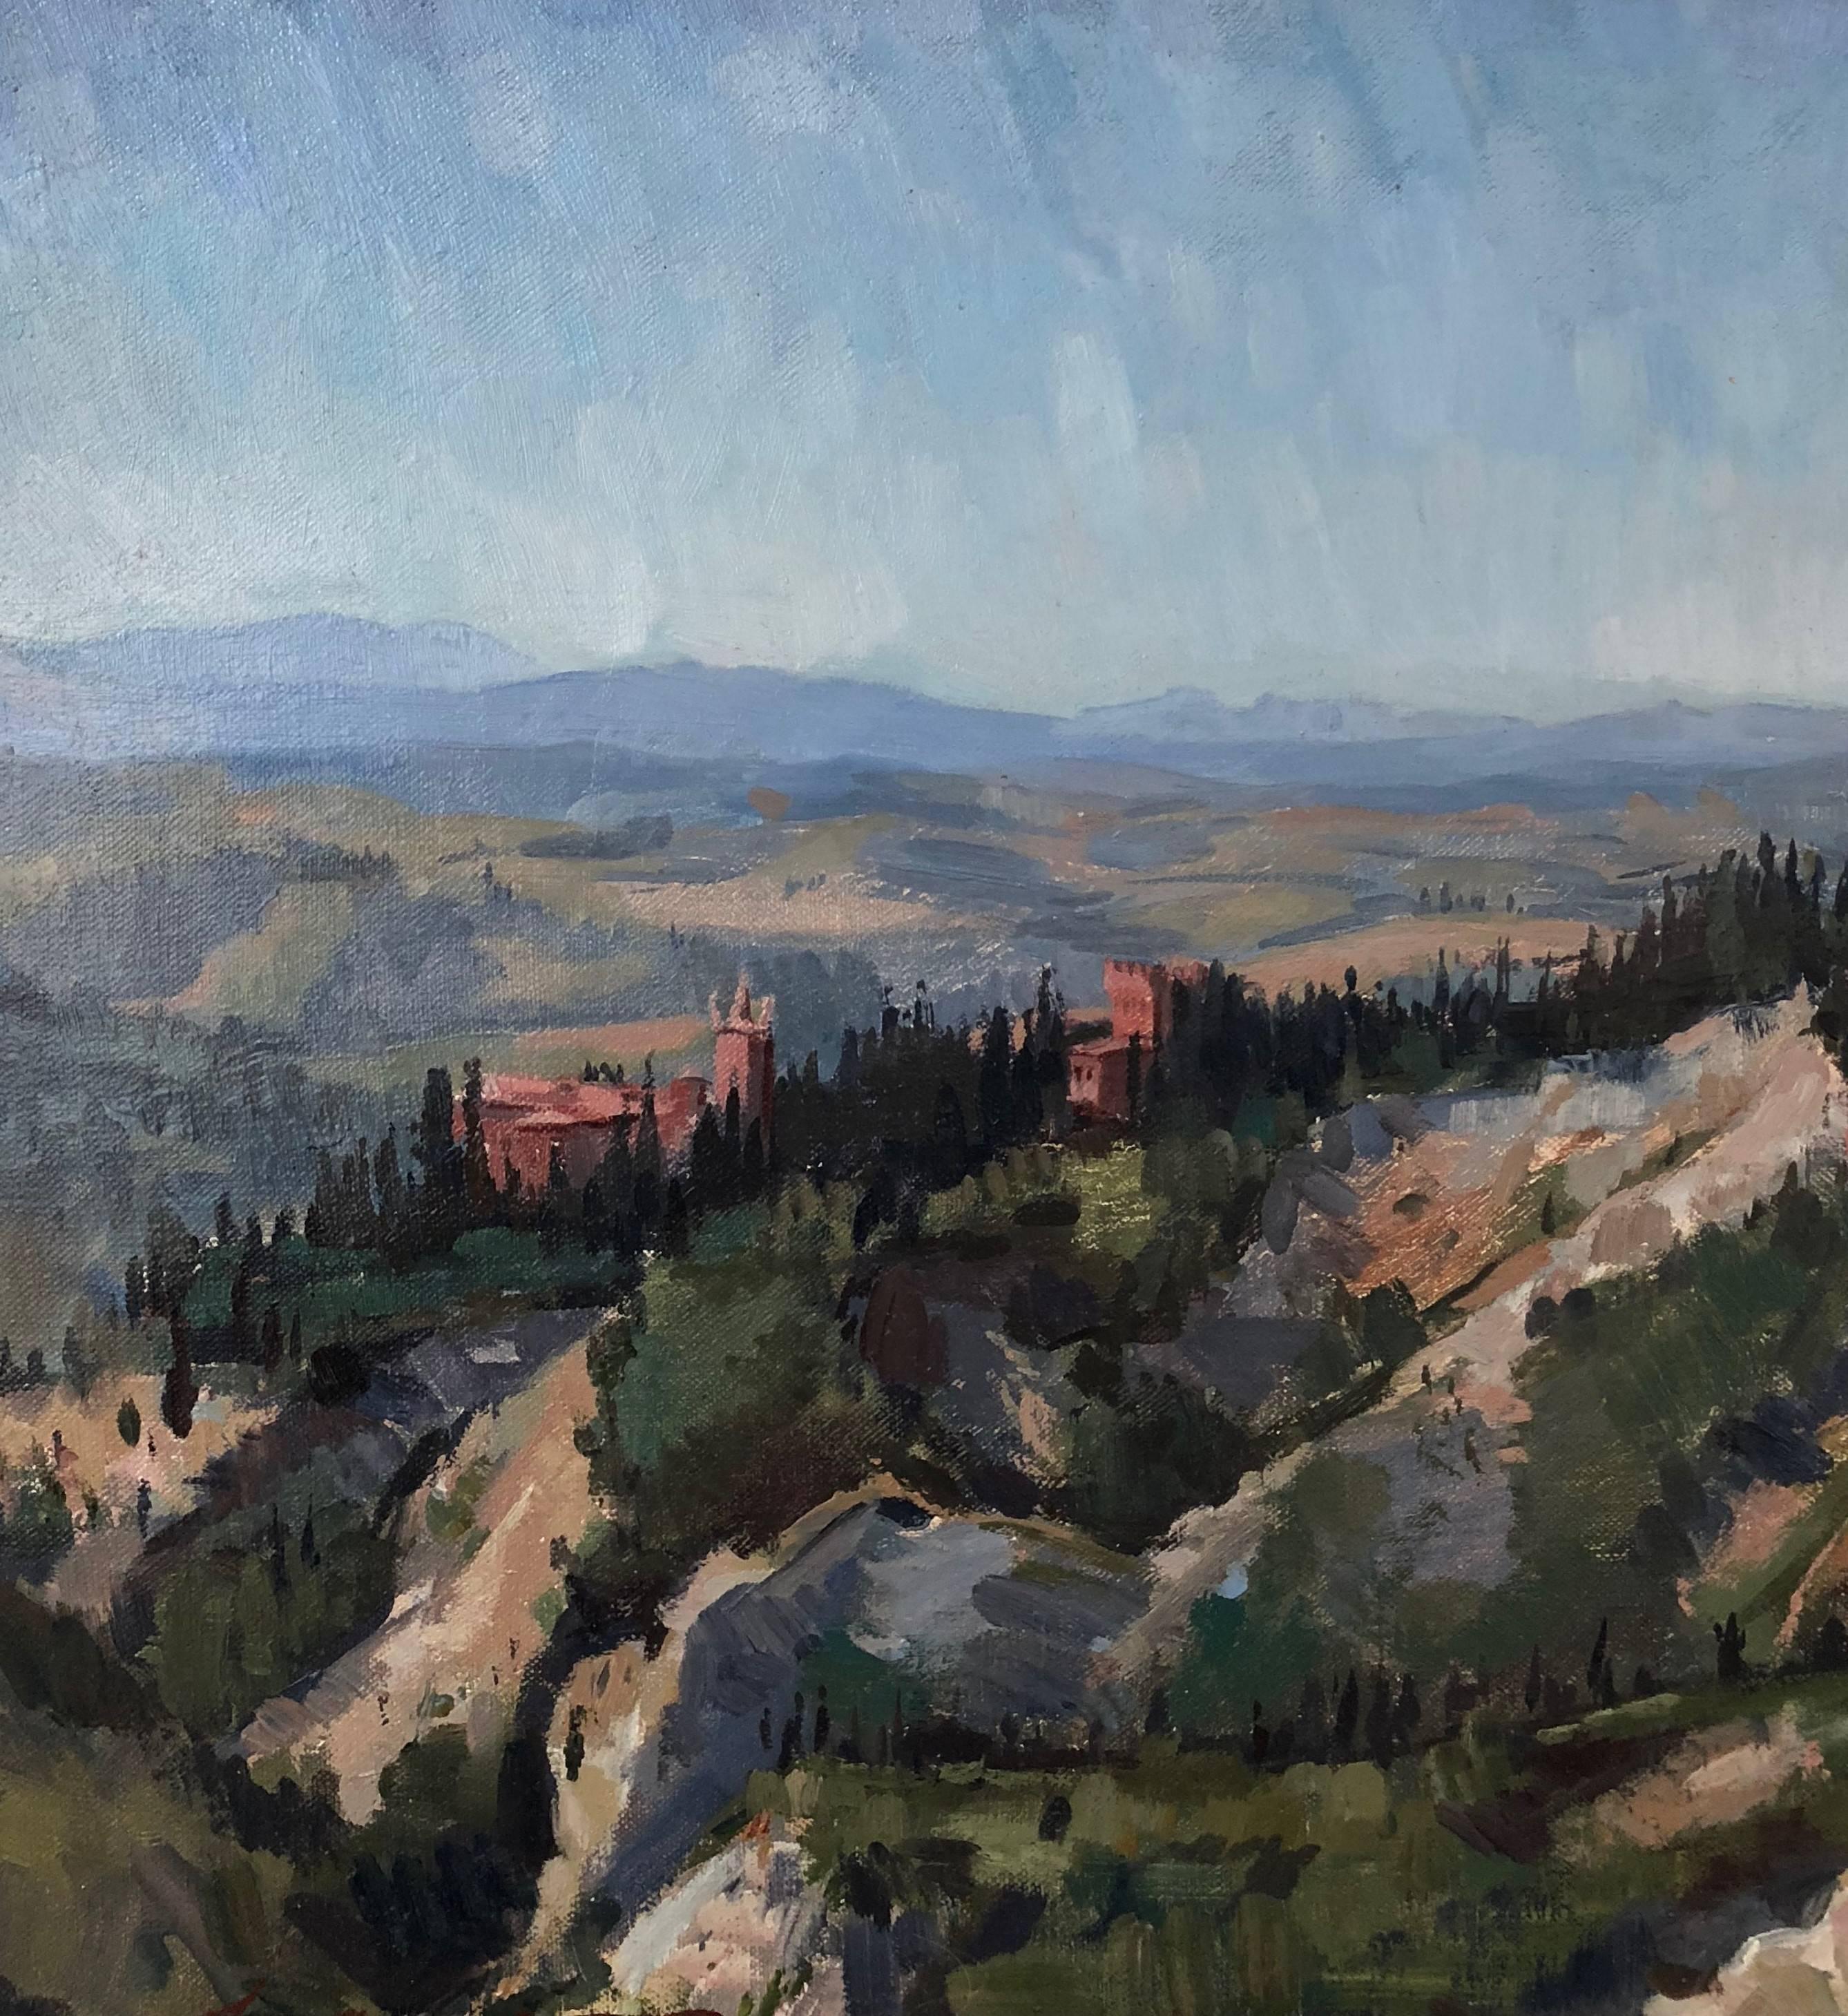 A patchwork of rich colors describes this quintessential Italian landscape. In the artist's neo-impressionistic style the rocky vista comes vibrantly to life.

Leo Mancini-Hresko is a prolific artist who creates painterly, dynamic work with bold,